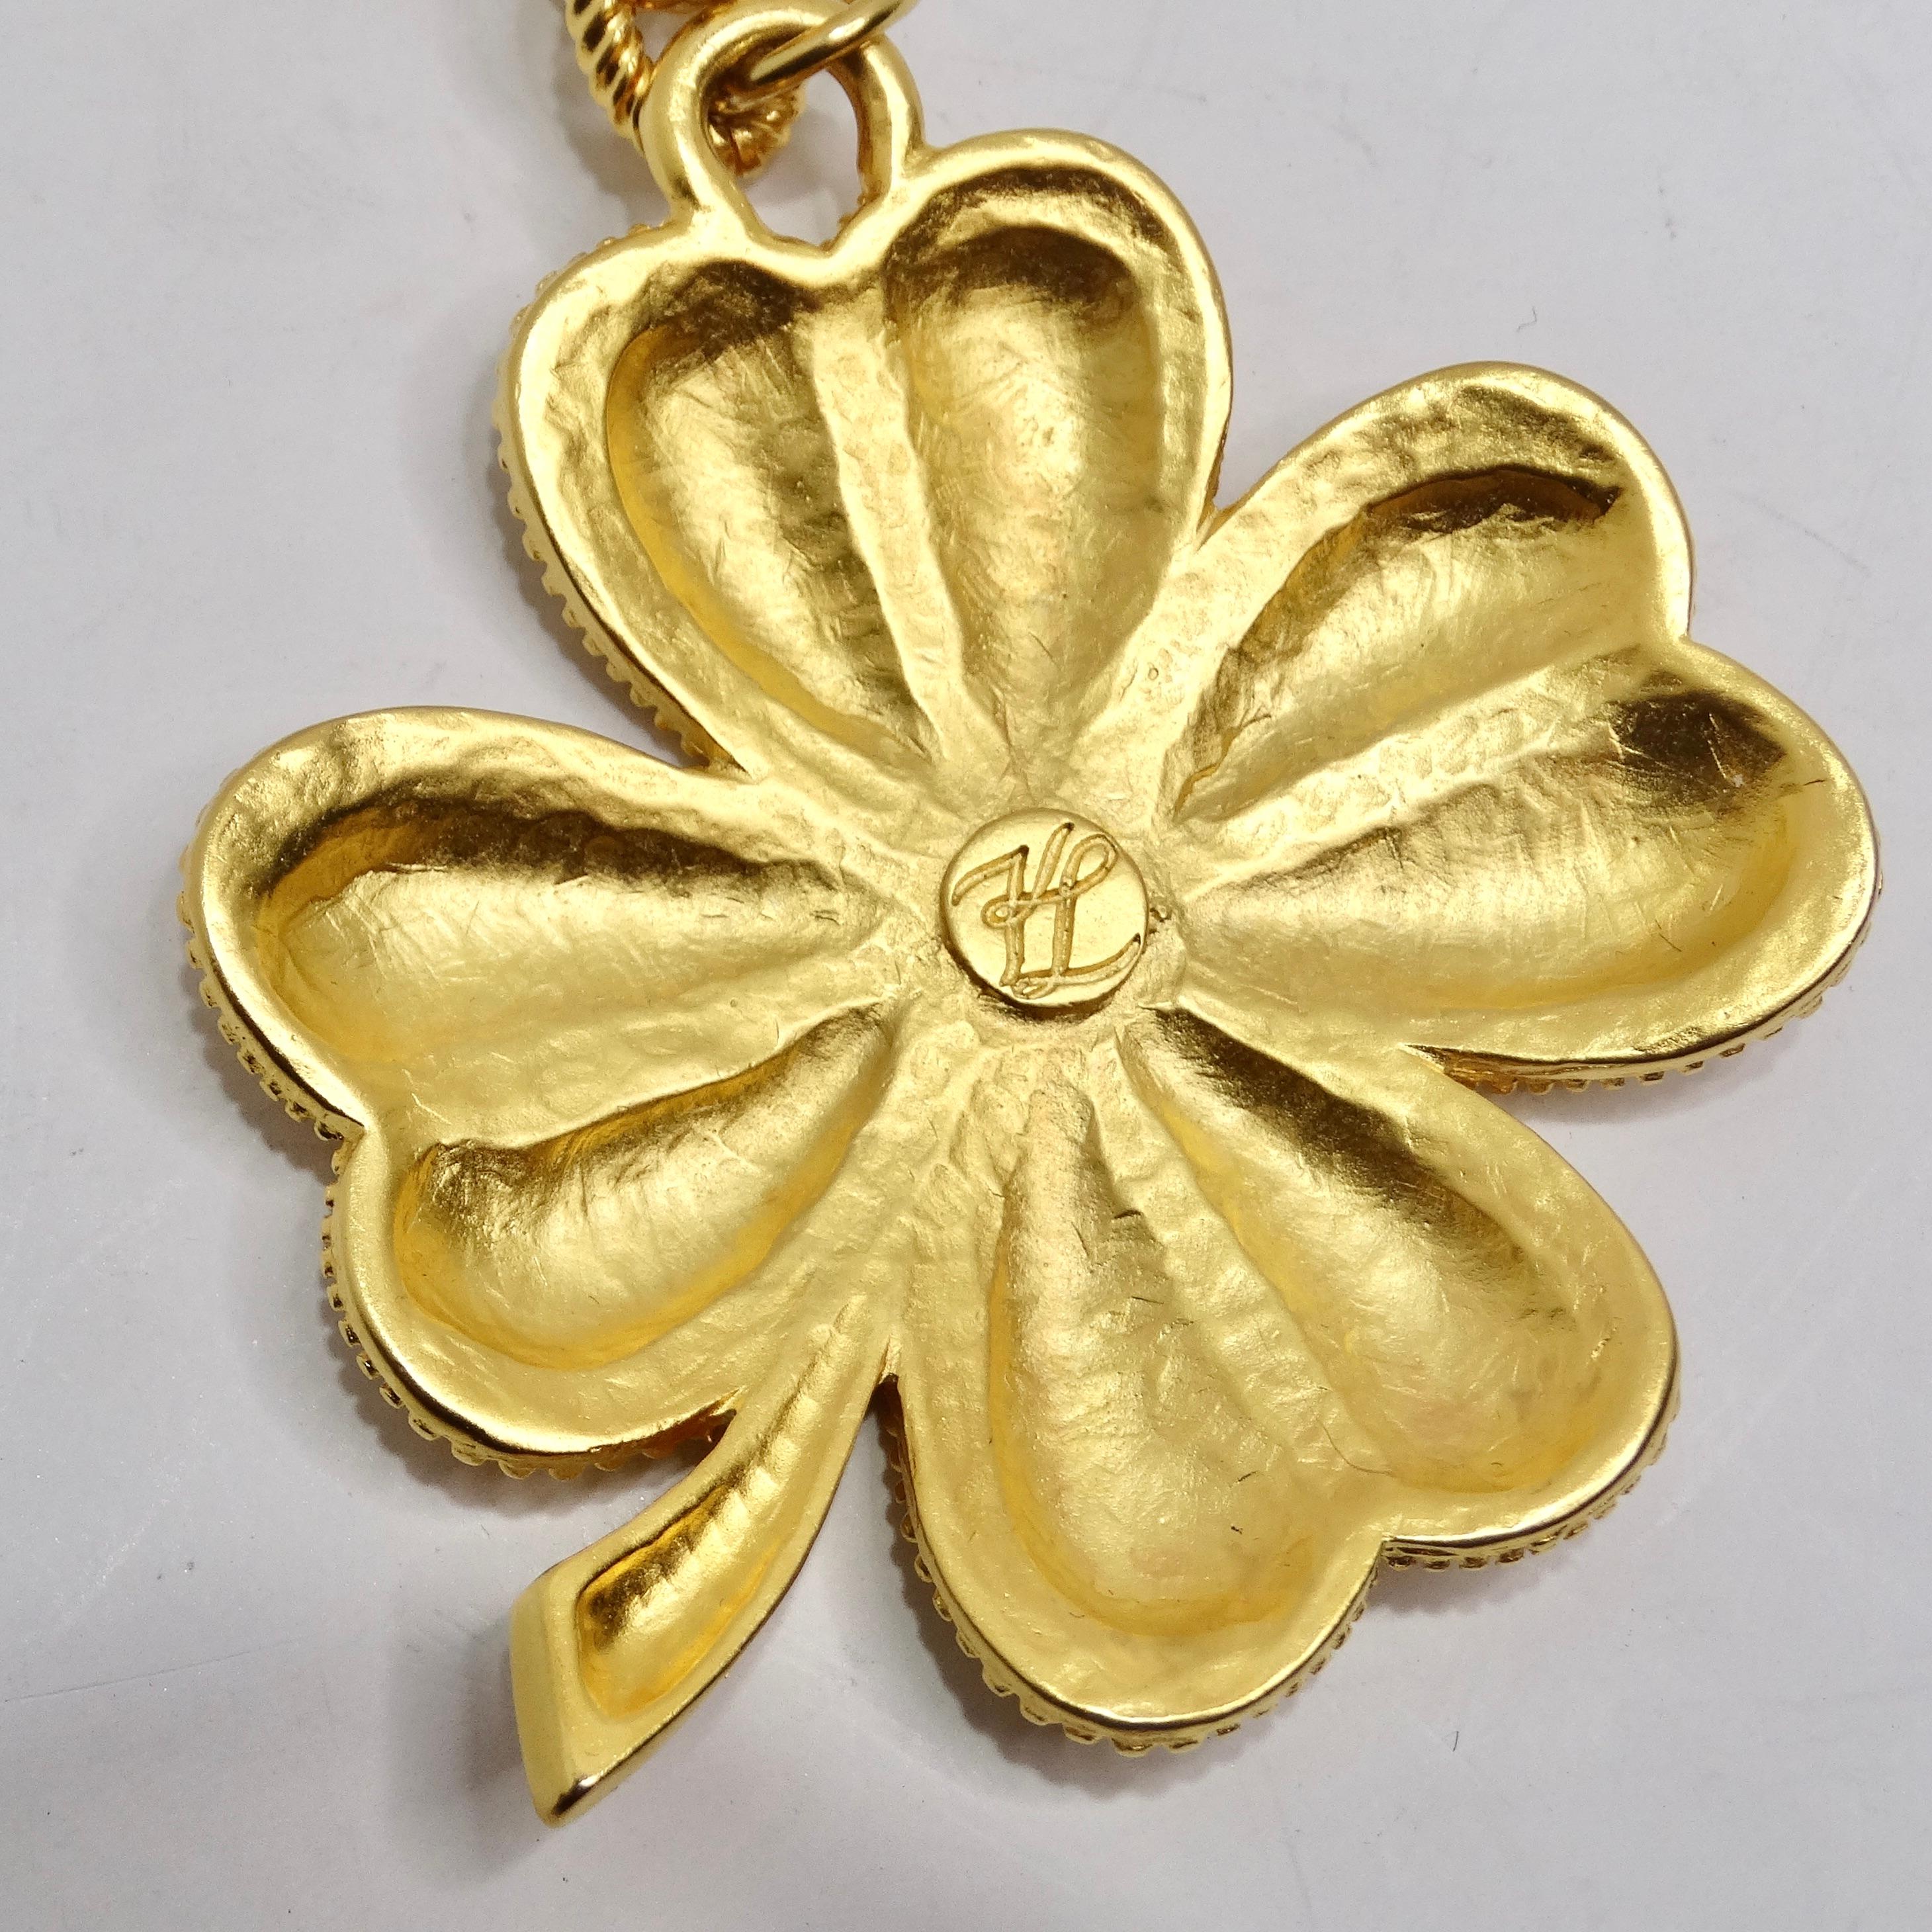 Karl Lagerfeld 1980s Gold Plated Shamrock Pendent Necklace For Sale 3